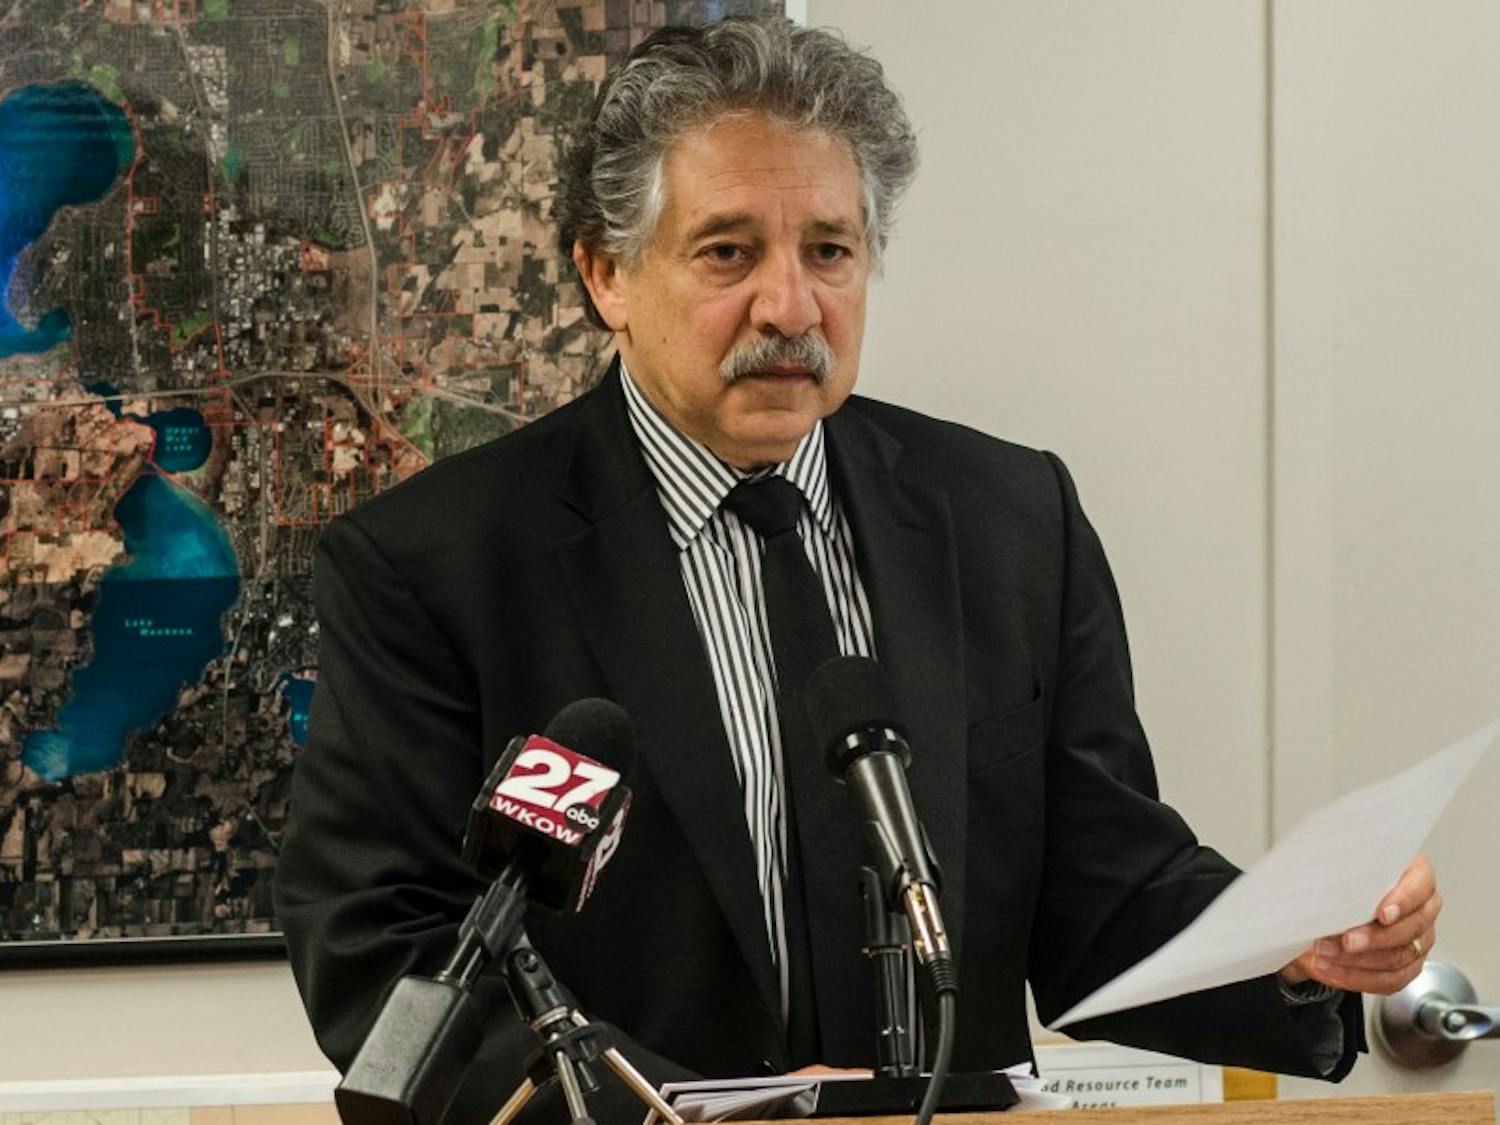 Mayor Paul Soglin plans to officially announce his candidacy for governor next week, entering a crowded field of Democratic hopefuls.